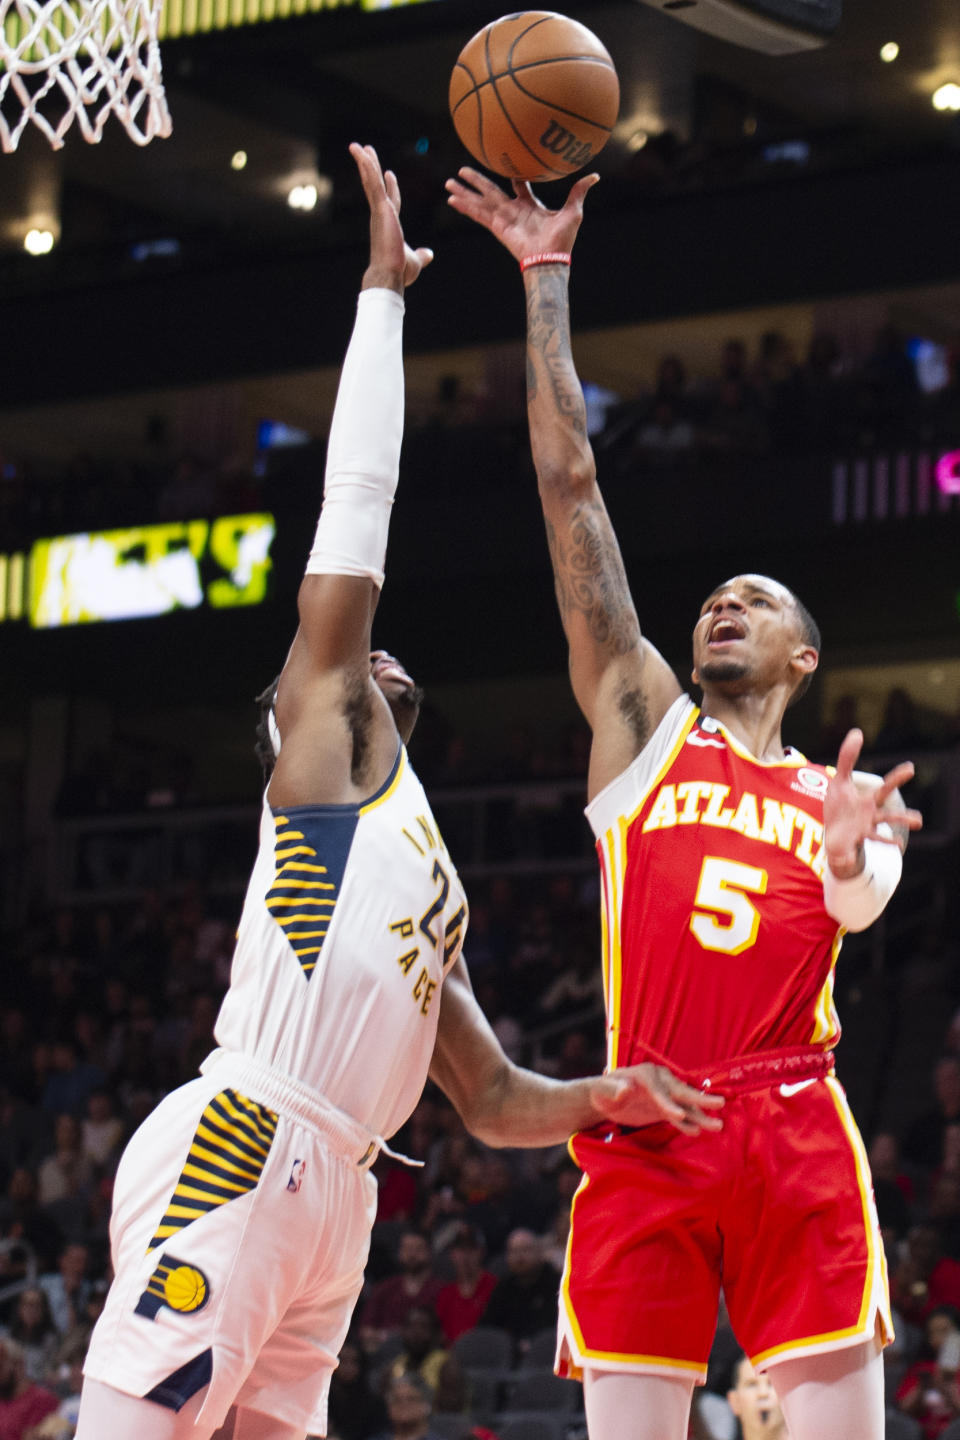 Atlanta Hawks guard Dejounte Murray shoots over Indiana Pacers guard Buddy Hield during the first half of an NBA basketball game, Saturday, March 25, 2023, in Atlanta. (AP Photo/Hakim Wright Sr.)